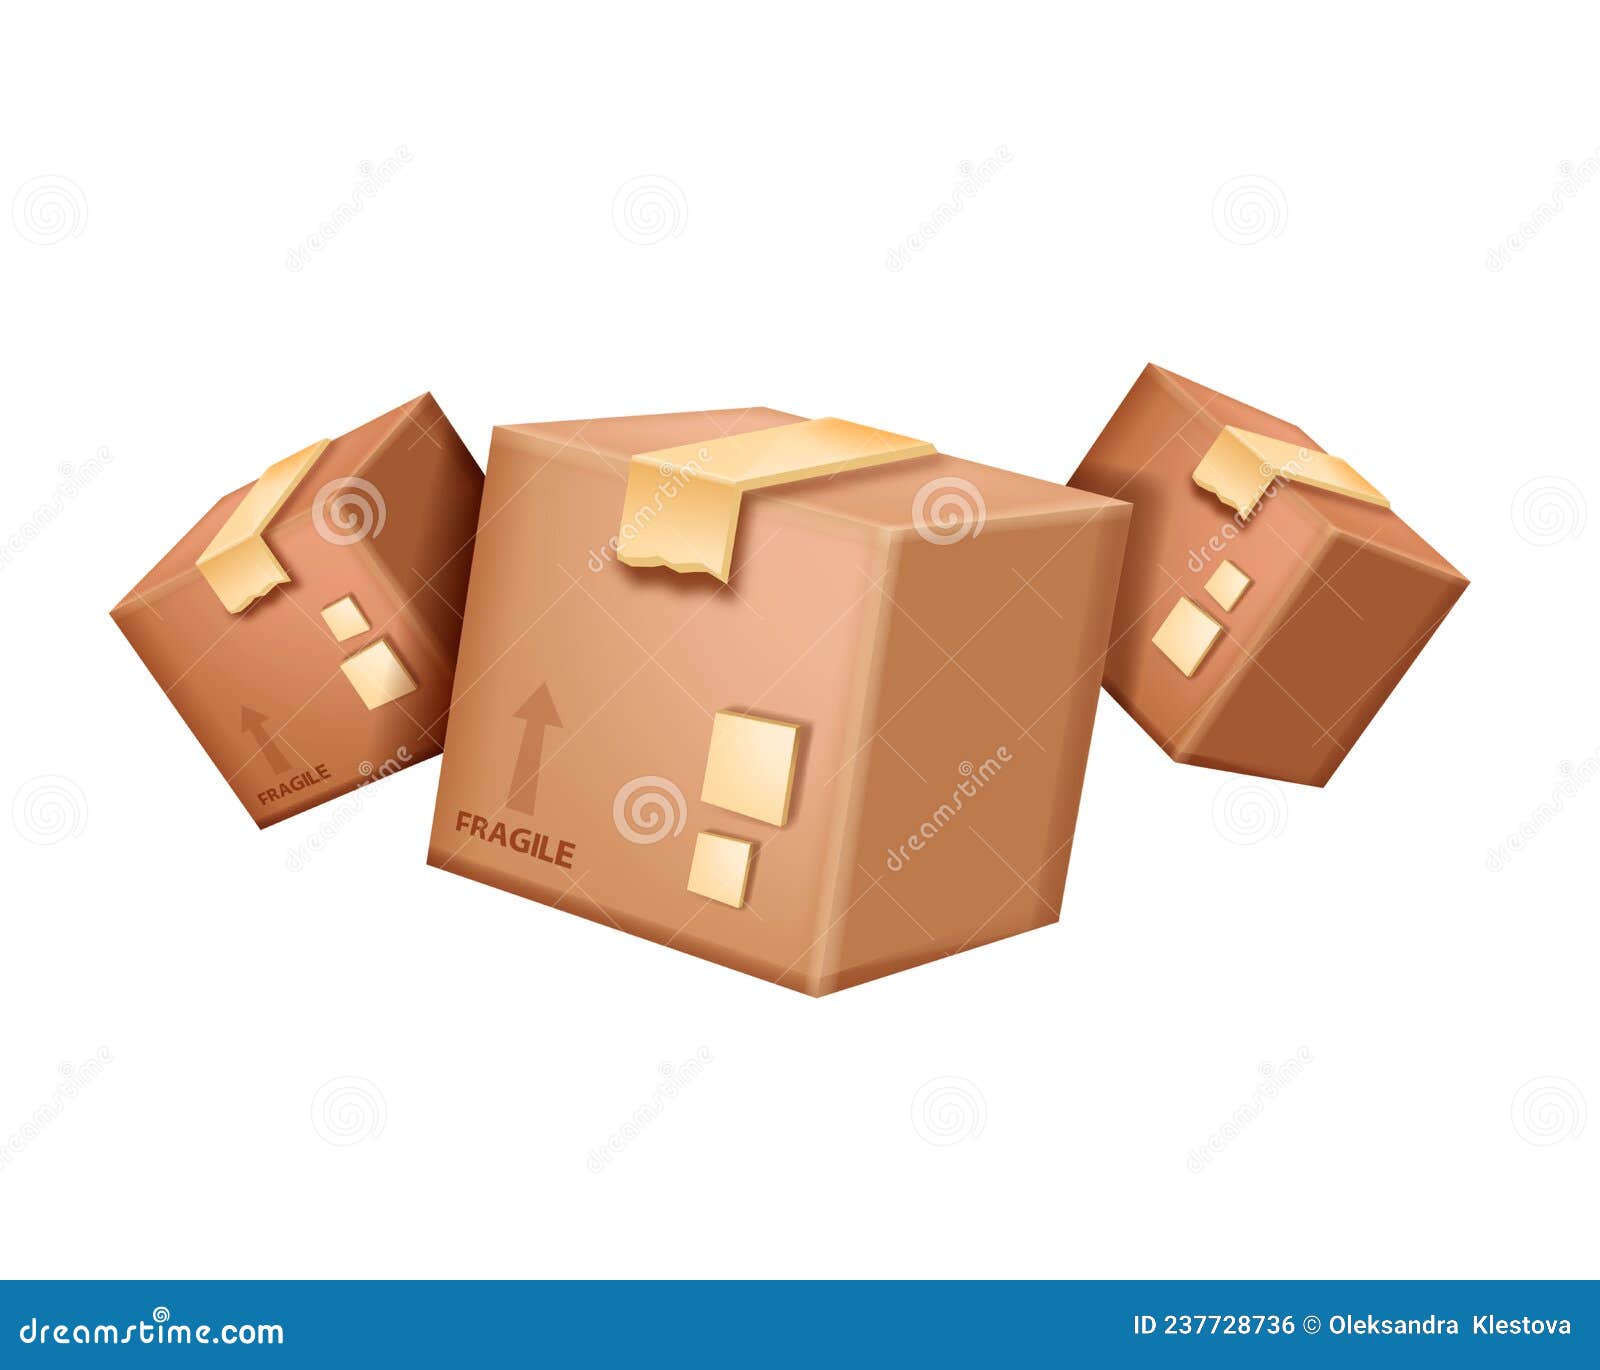 How to Create a 3D Shipping Box Icon